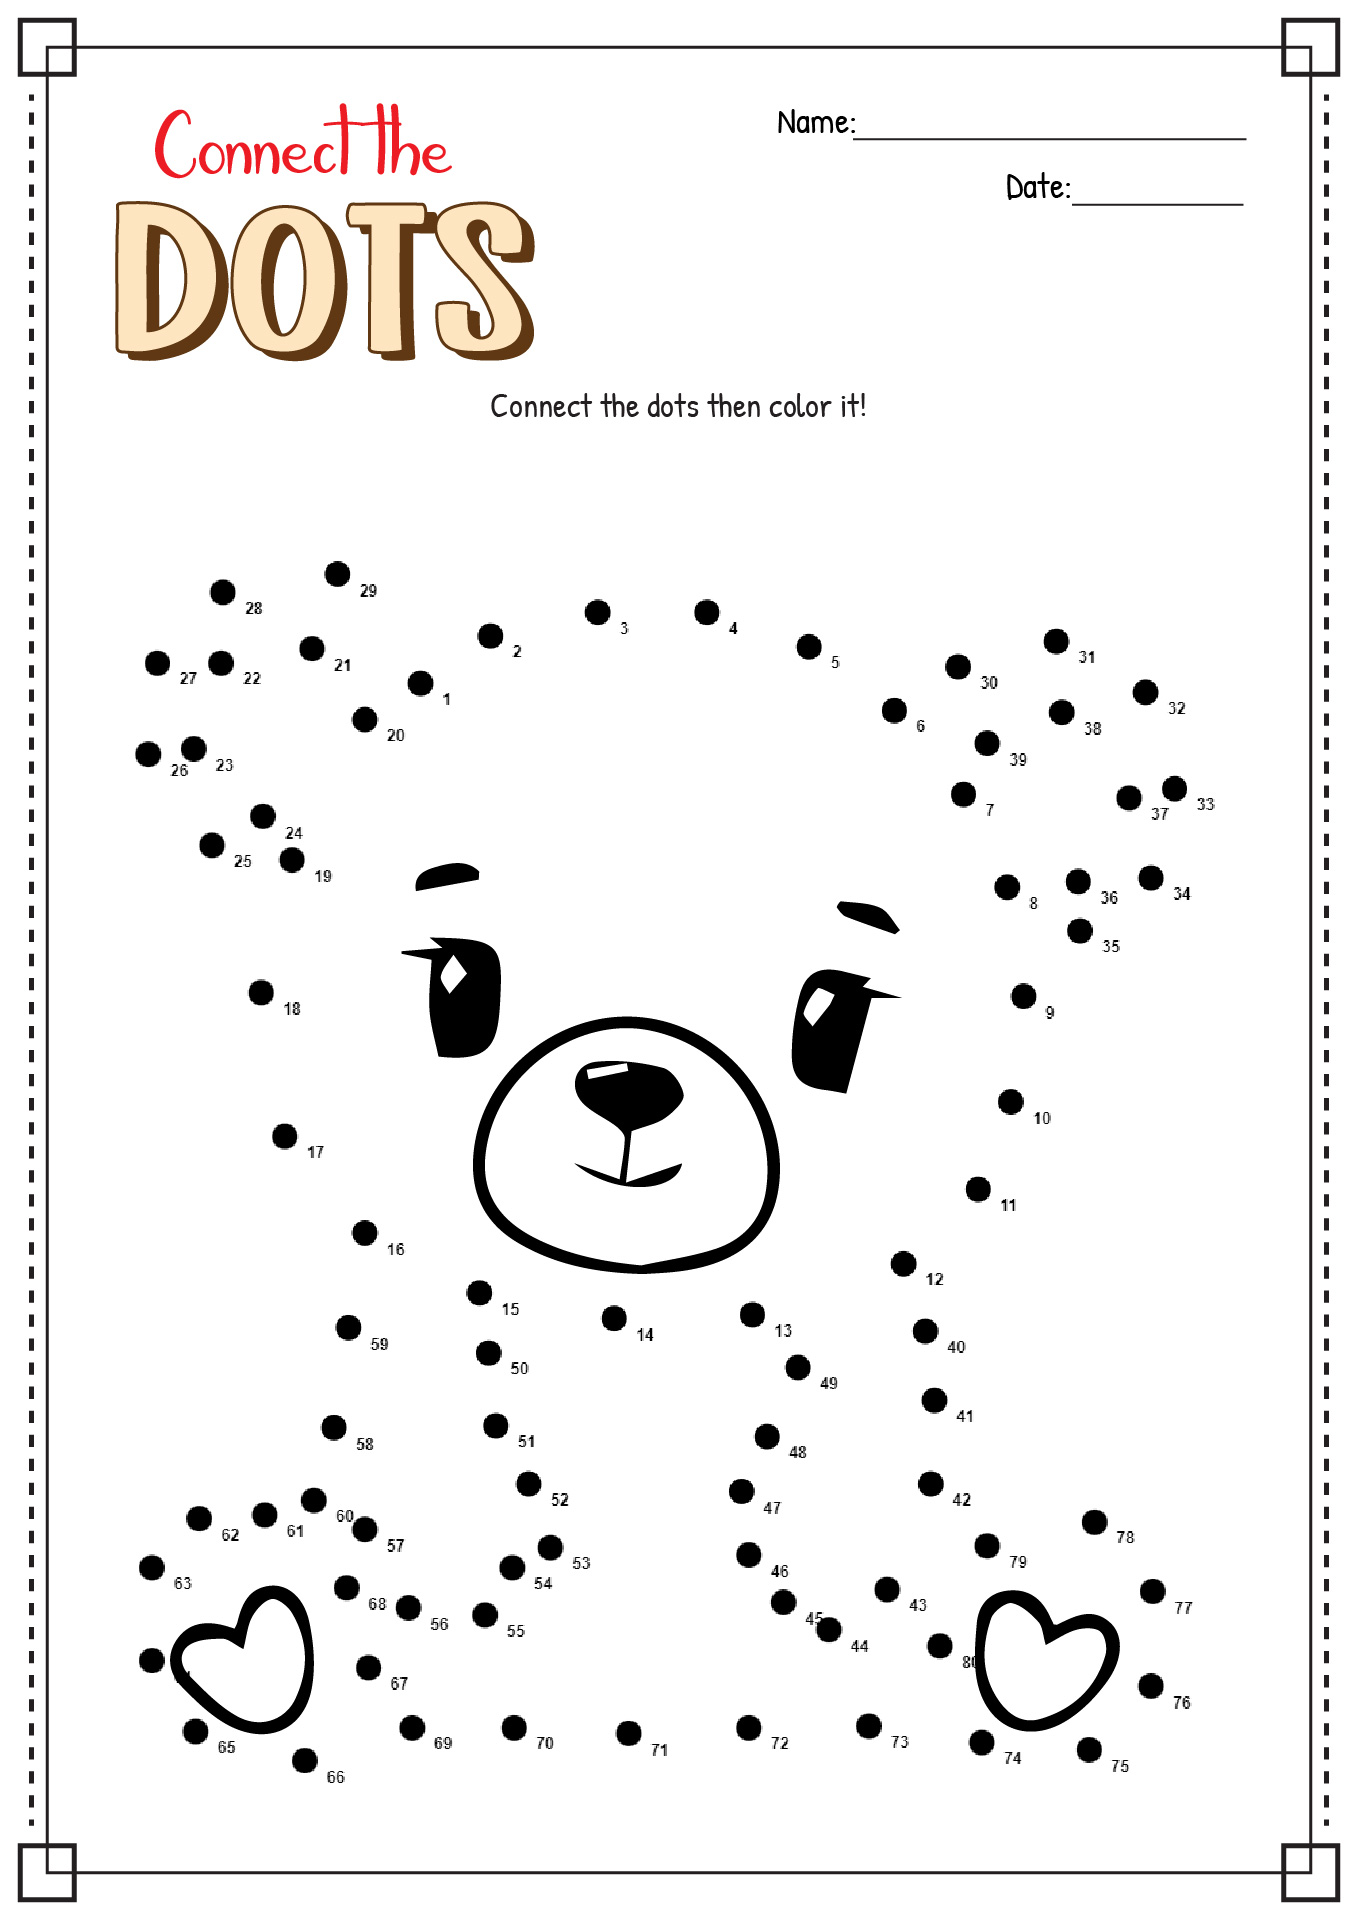 Free Printable Connect the Dots Worksheet